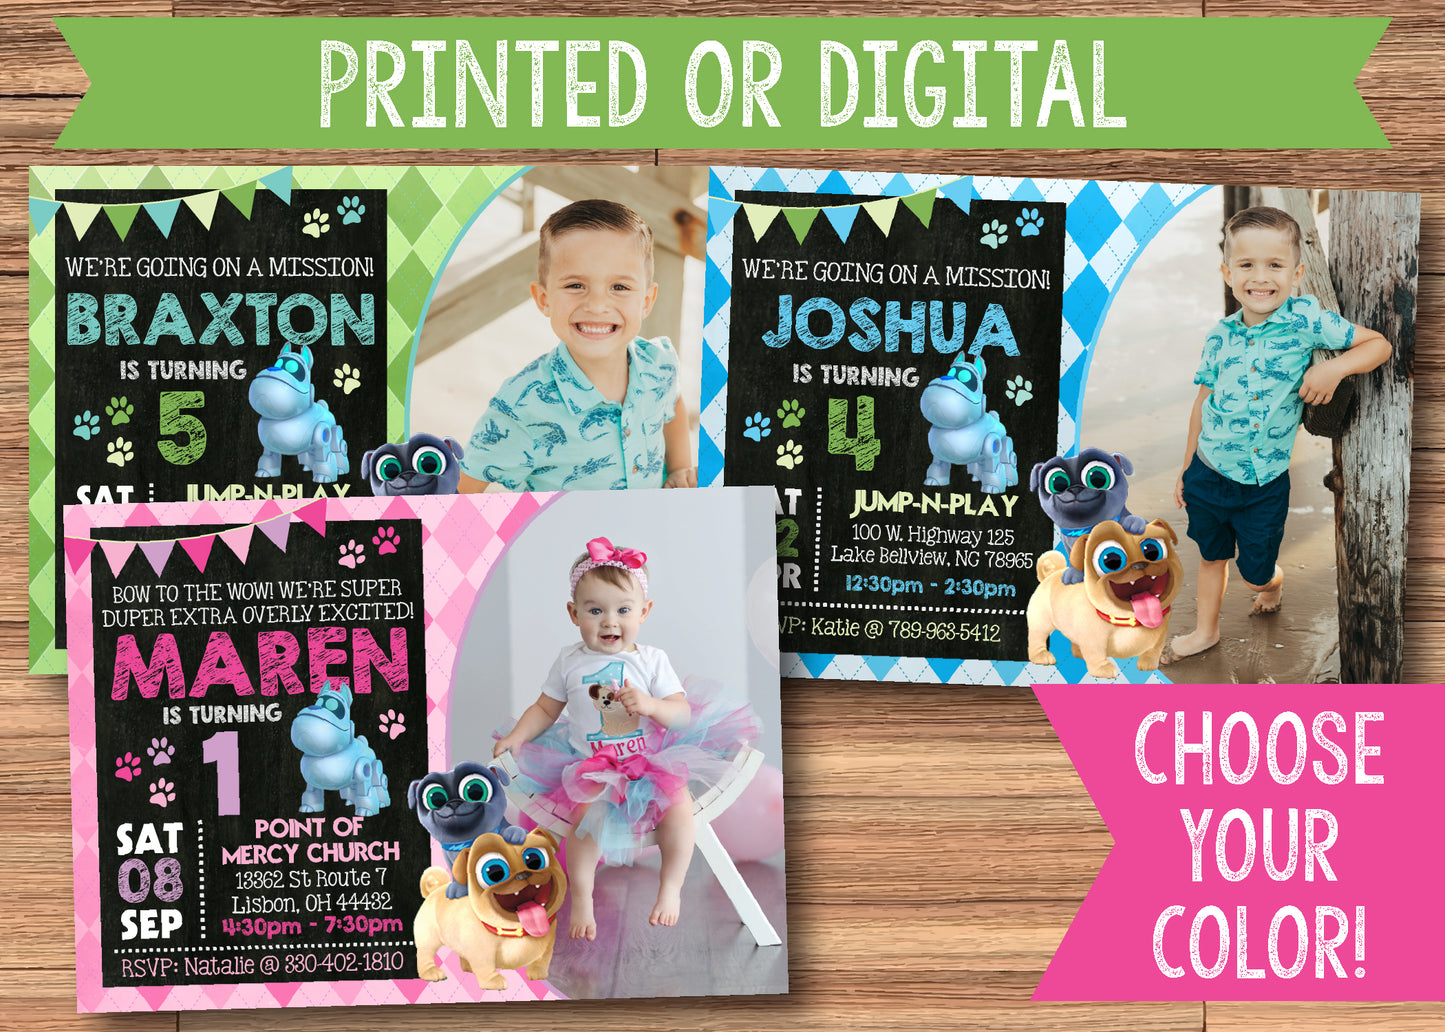 PUPPY DOG PALS Pink, Green or Blue Birthday Party Invitation with Photo! Printed or Digital!